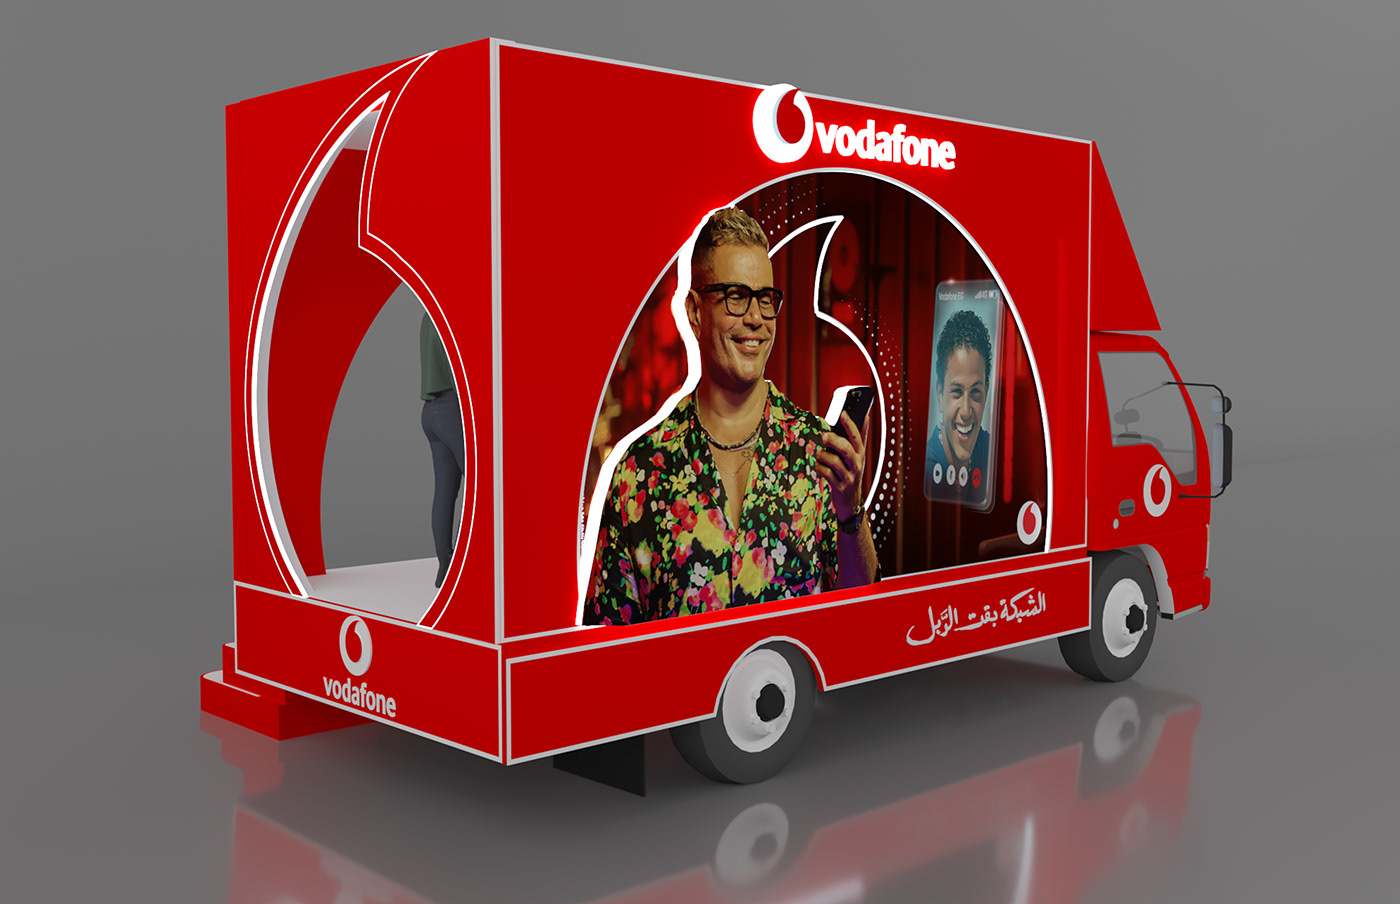 vodafone Roadshow Event brand identity Stand Exhibition  booth 3D Render vray